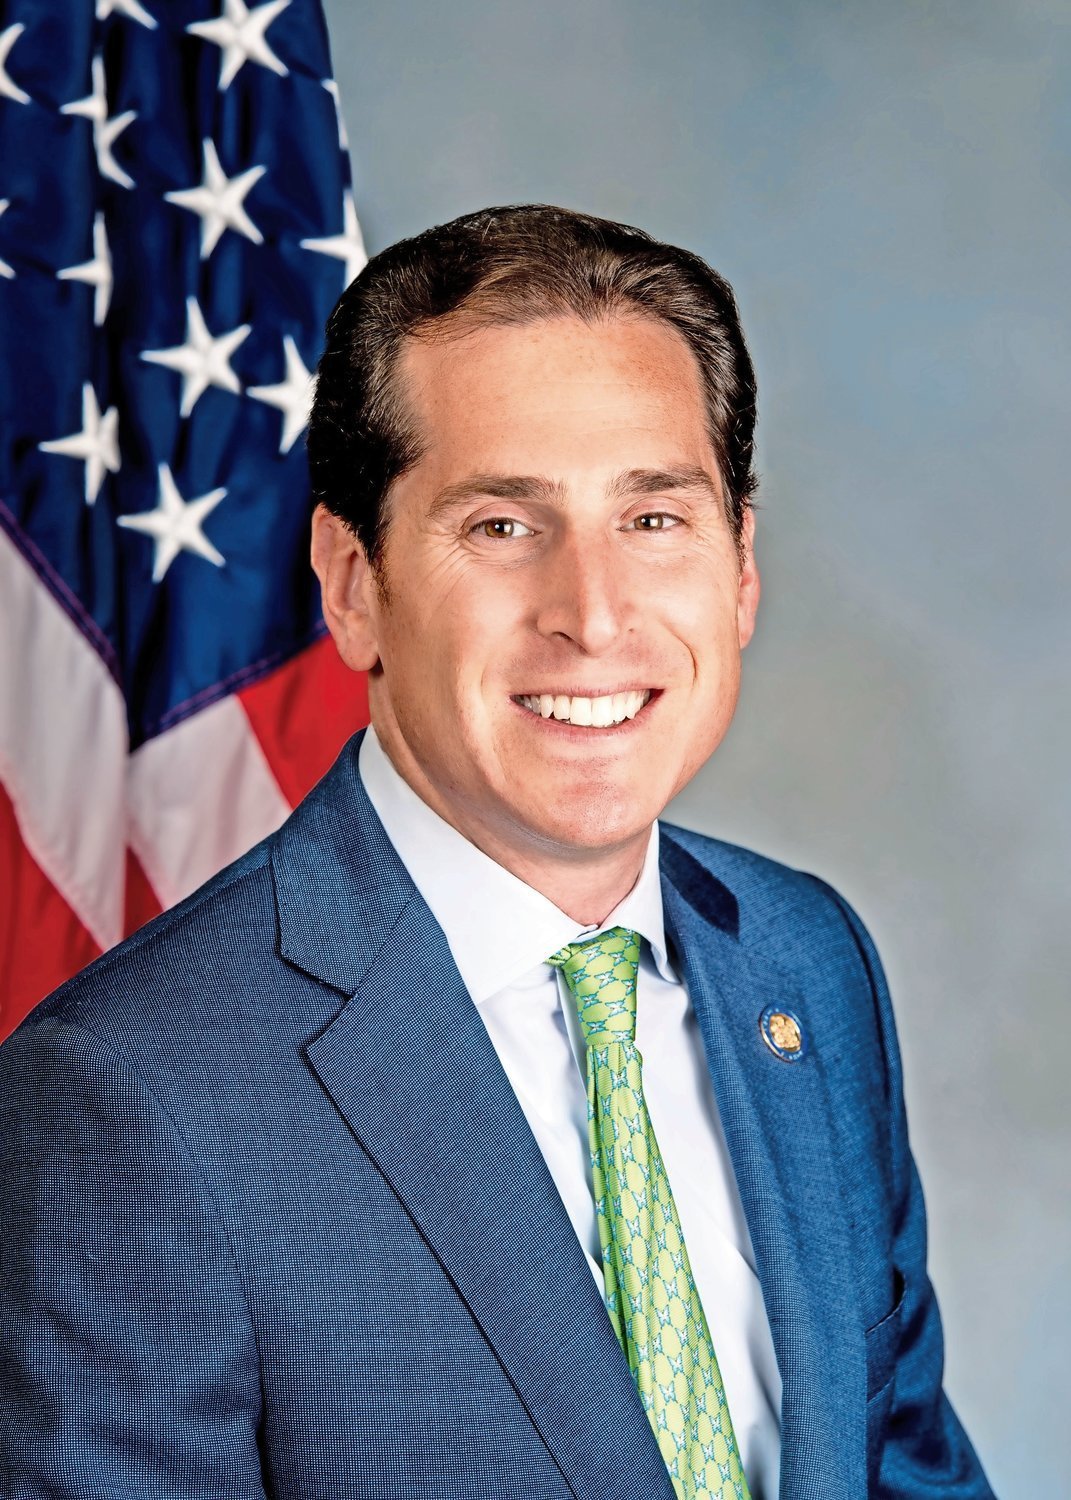 Todd Kaminsky's last day as an elected official came to a close on July 29.